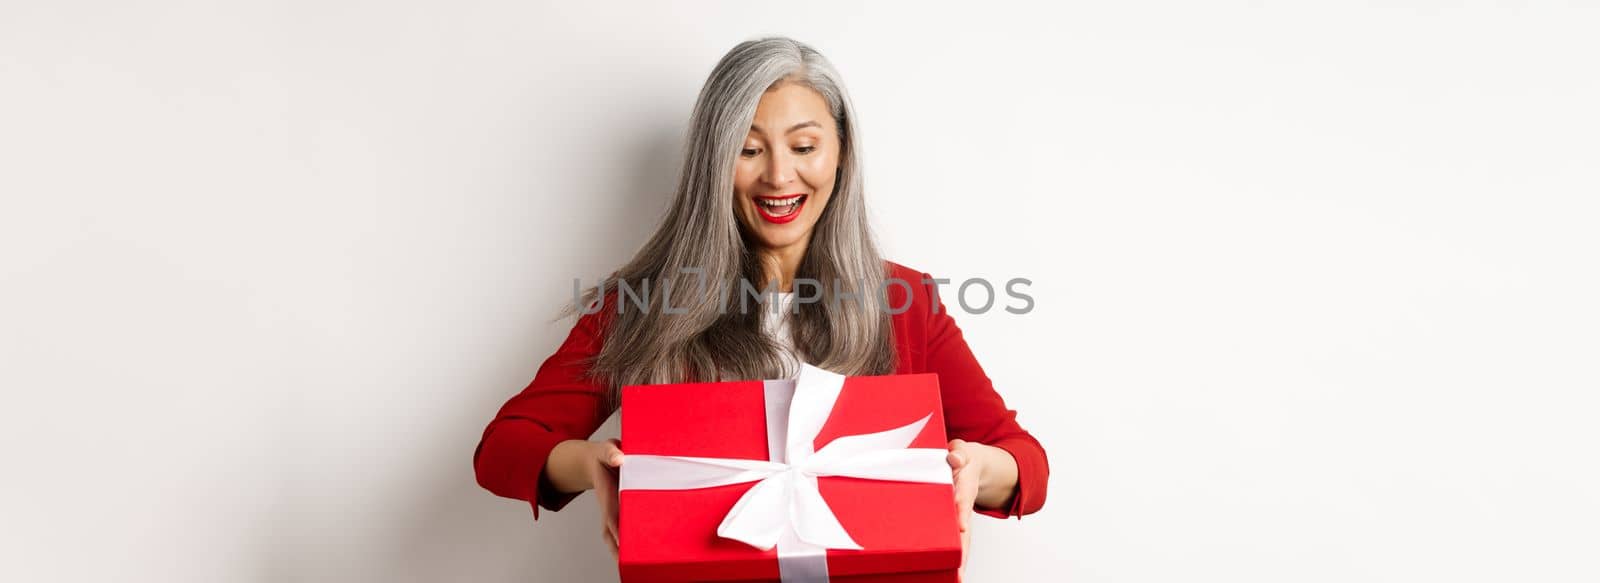 Happy elderly woman with grey hair, receive present, looking at red gift box and smiling surprised, standing over white background.